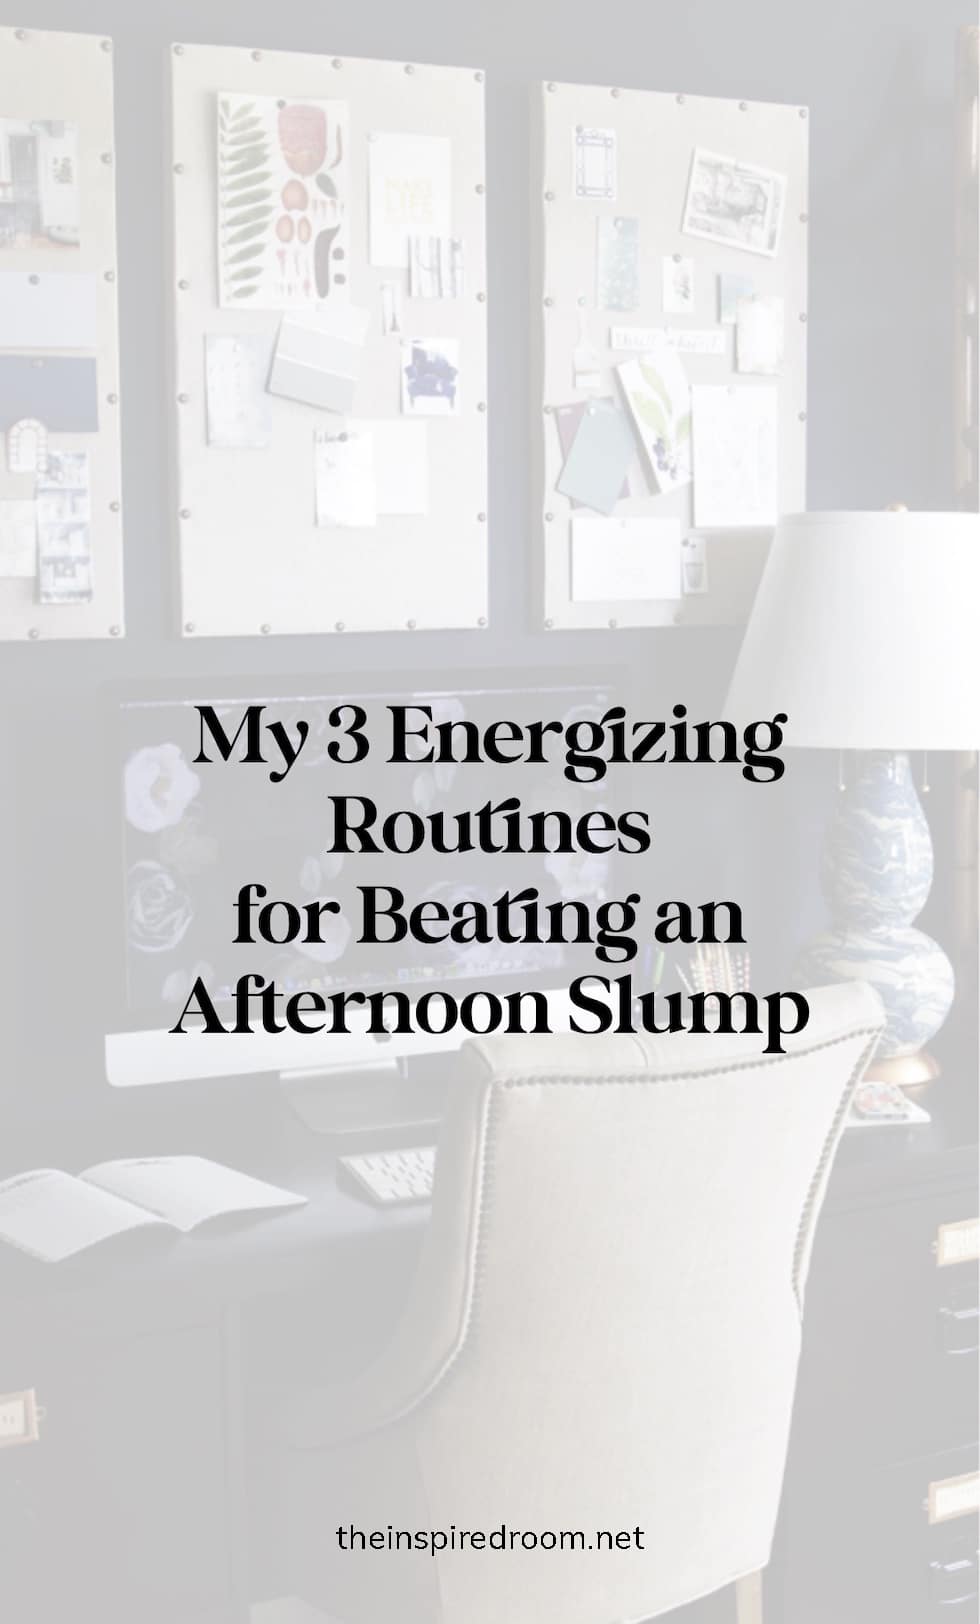 My Three Energizing Routines for Beating an Afternoon Slump